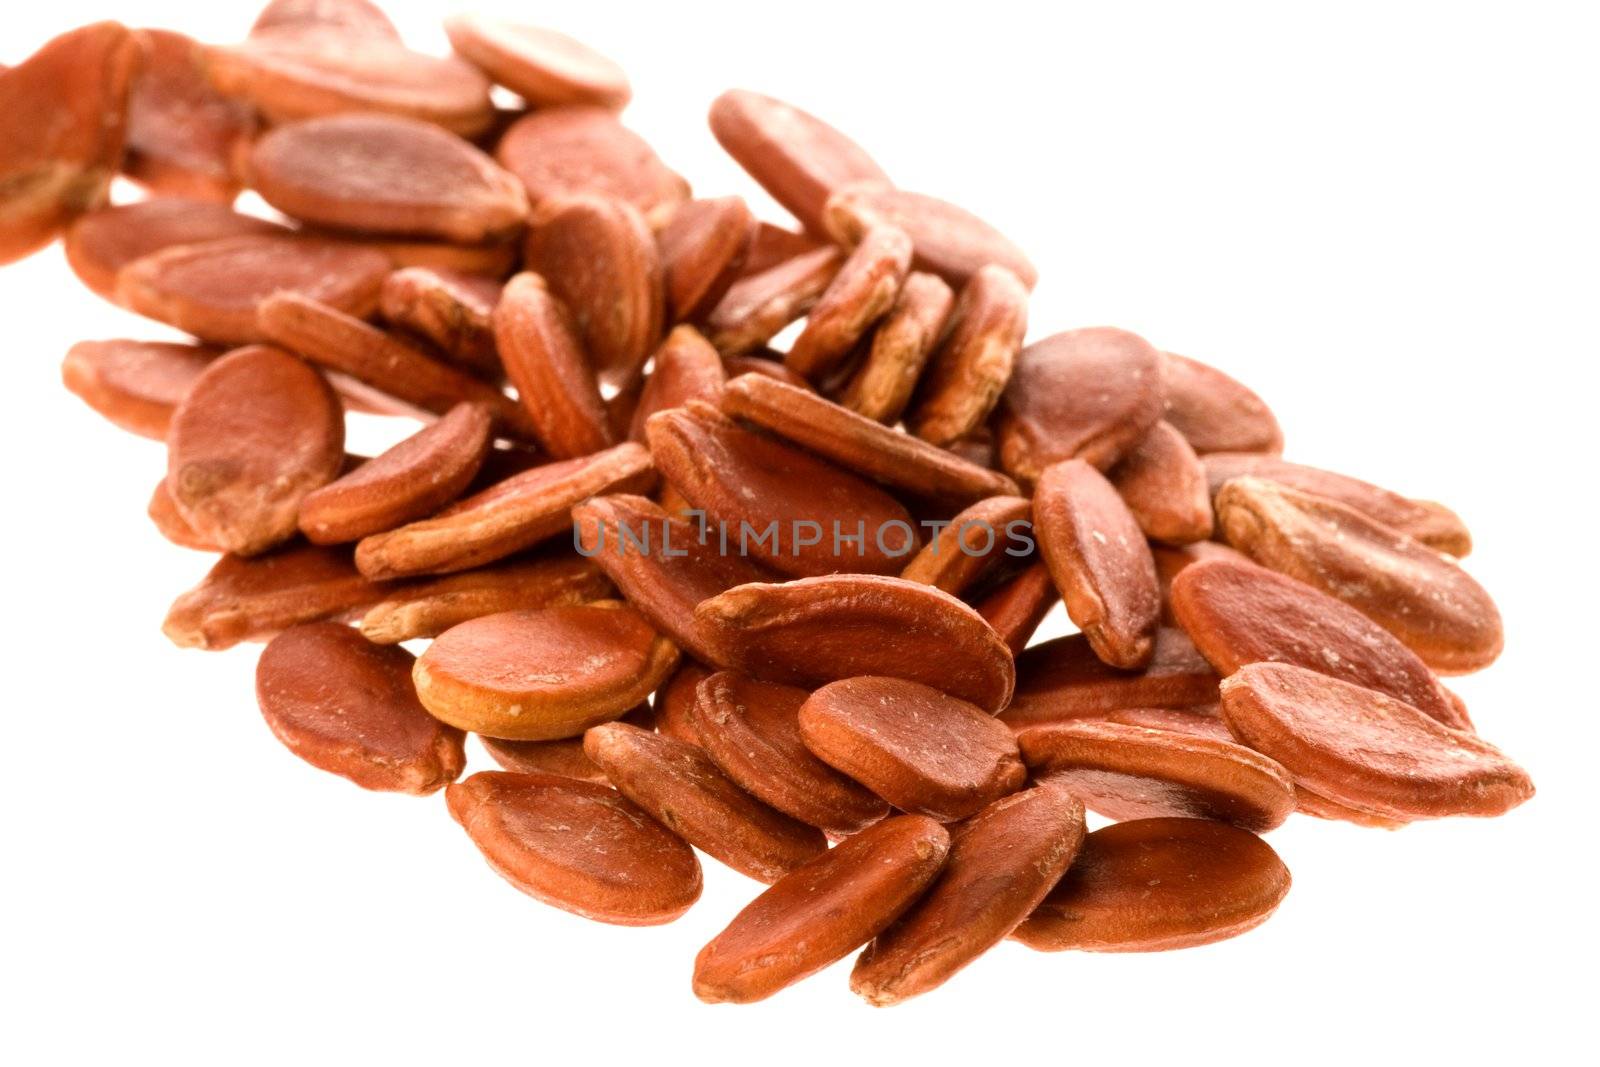 Isolated macro image of melon seeds.